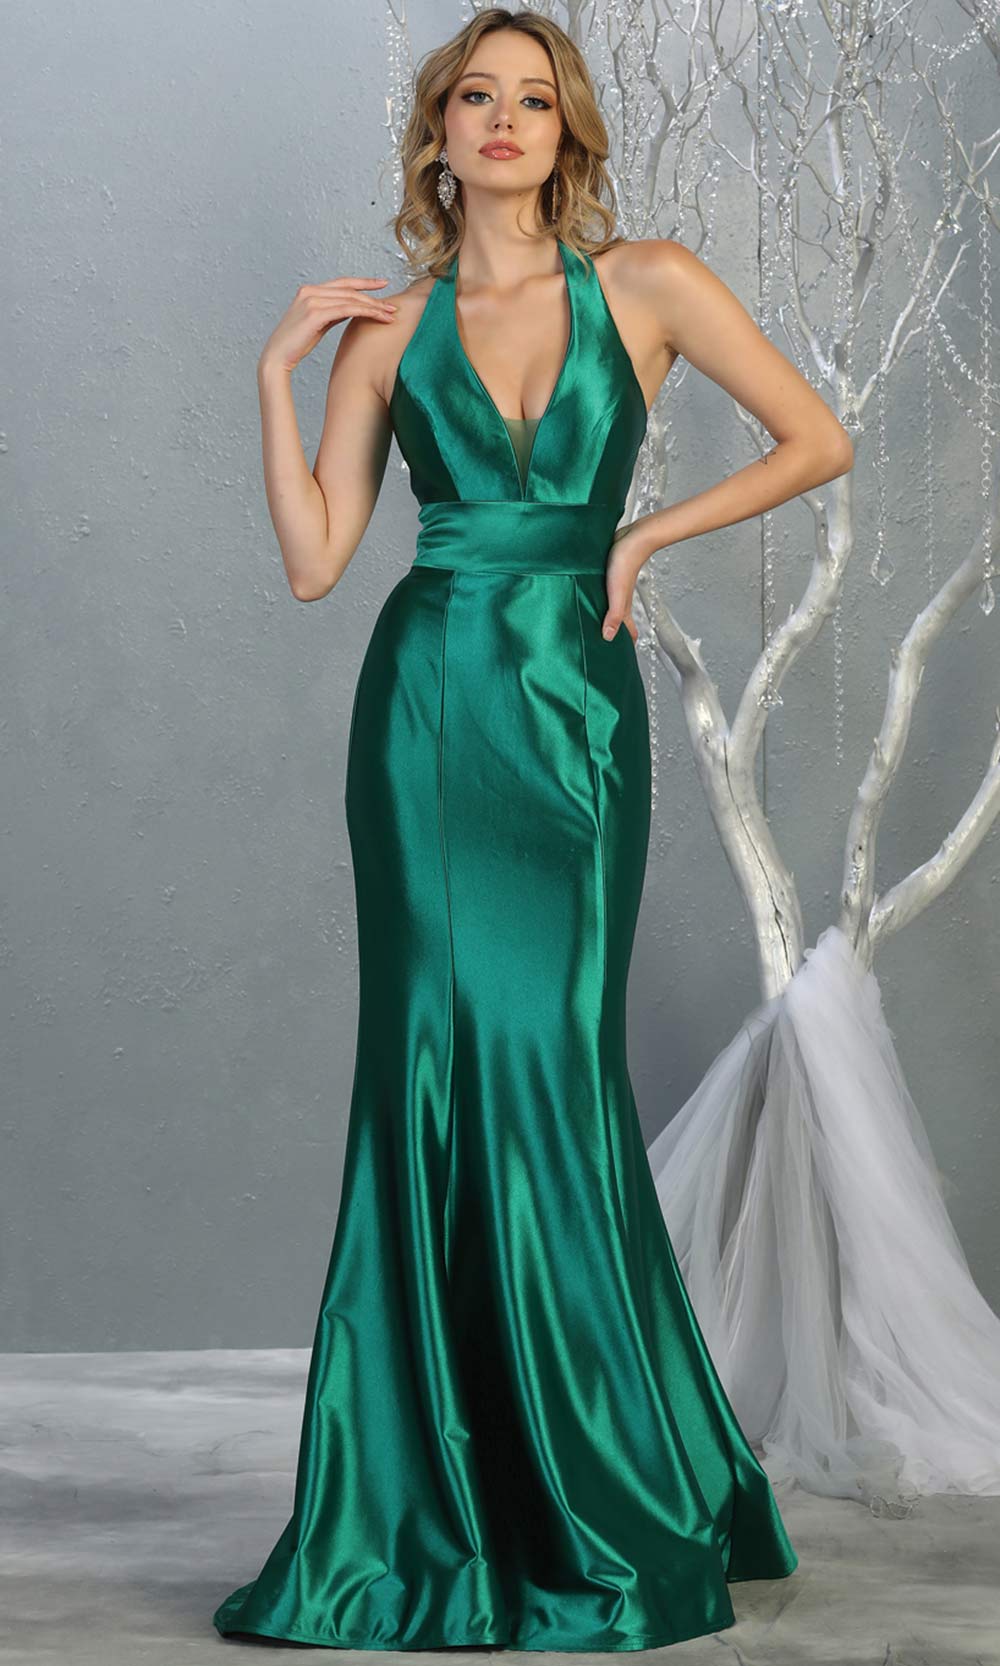 Mayqueen MQ 1740 long emerald green halter evening fitted mermaid dress w/low back. Full length green satin gown is perfect for enagagement/e-shoot dress, formal wedding guest, indowestern gown, evening party dress, prom, bridesmaid. Plus sizes avail.jpg